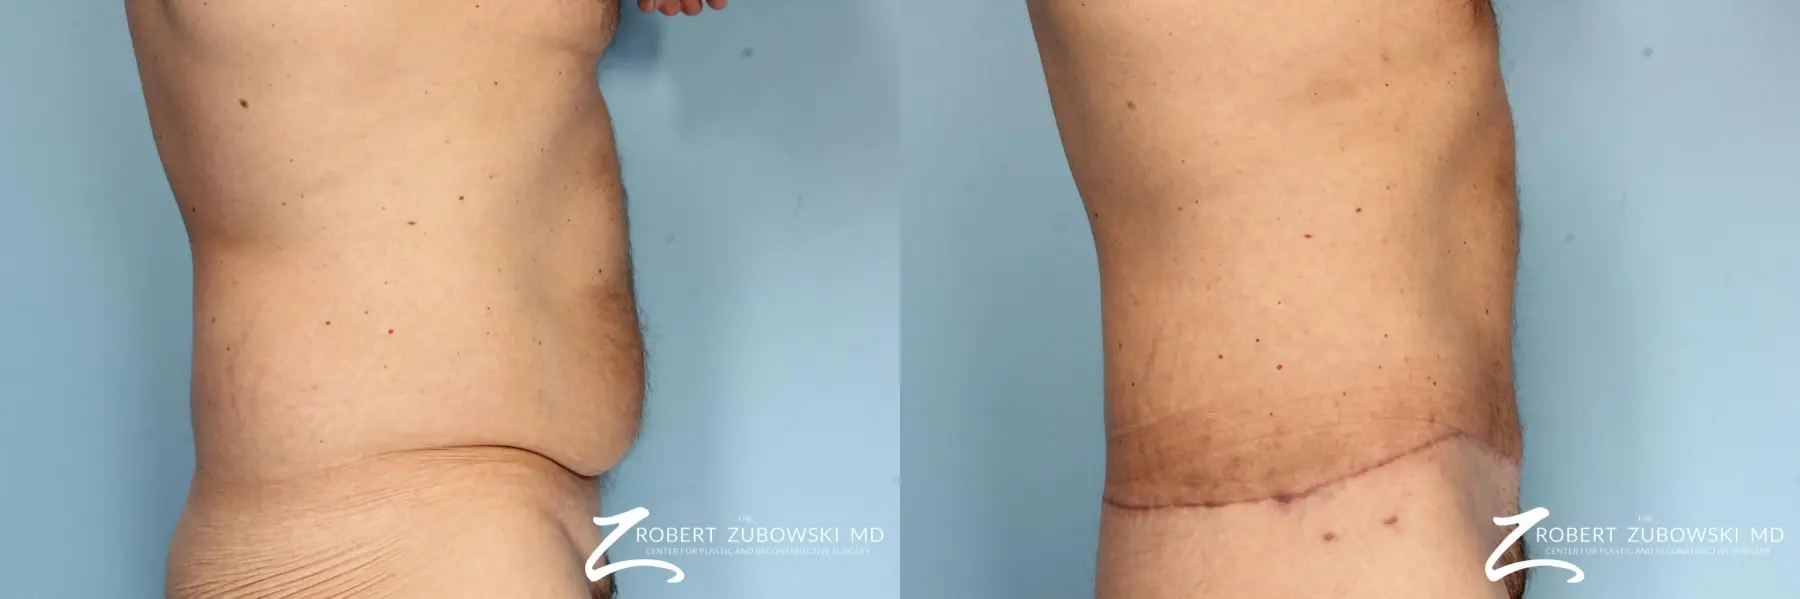 Body Lift For Men: Patient 1 - Before and After 3